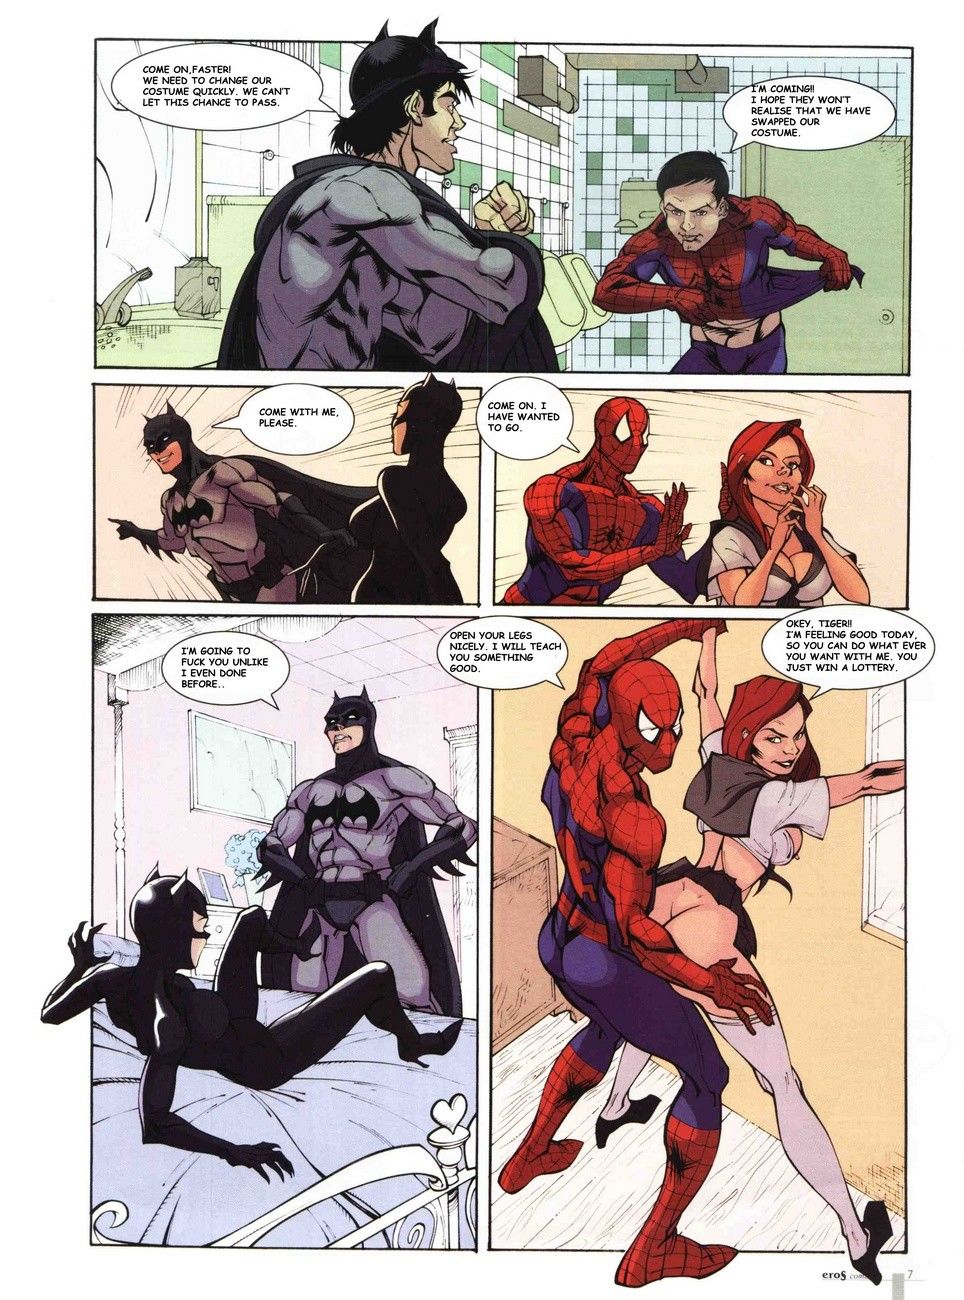 Eros - Catwoman Carnaval,Spiderman Sex page 3